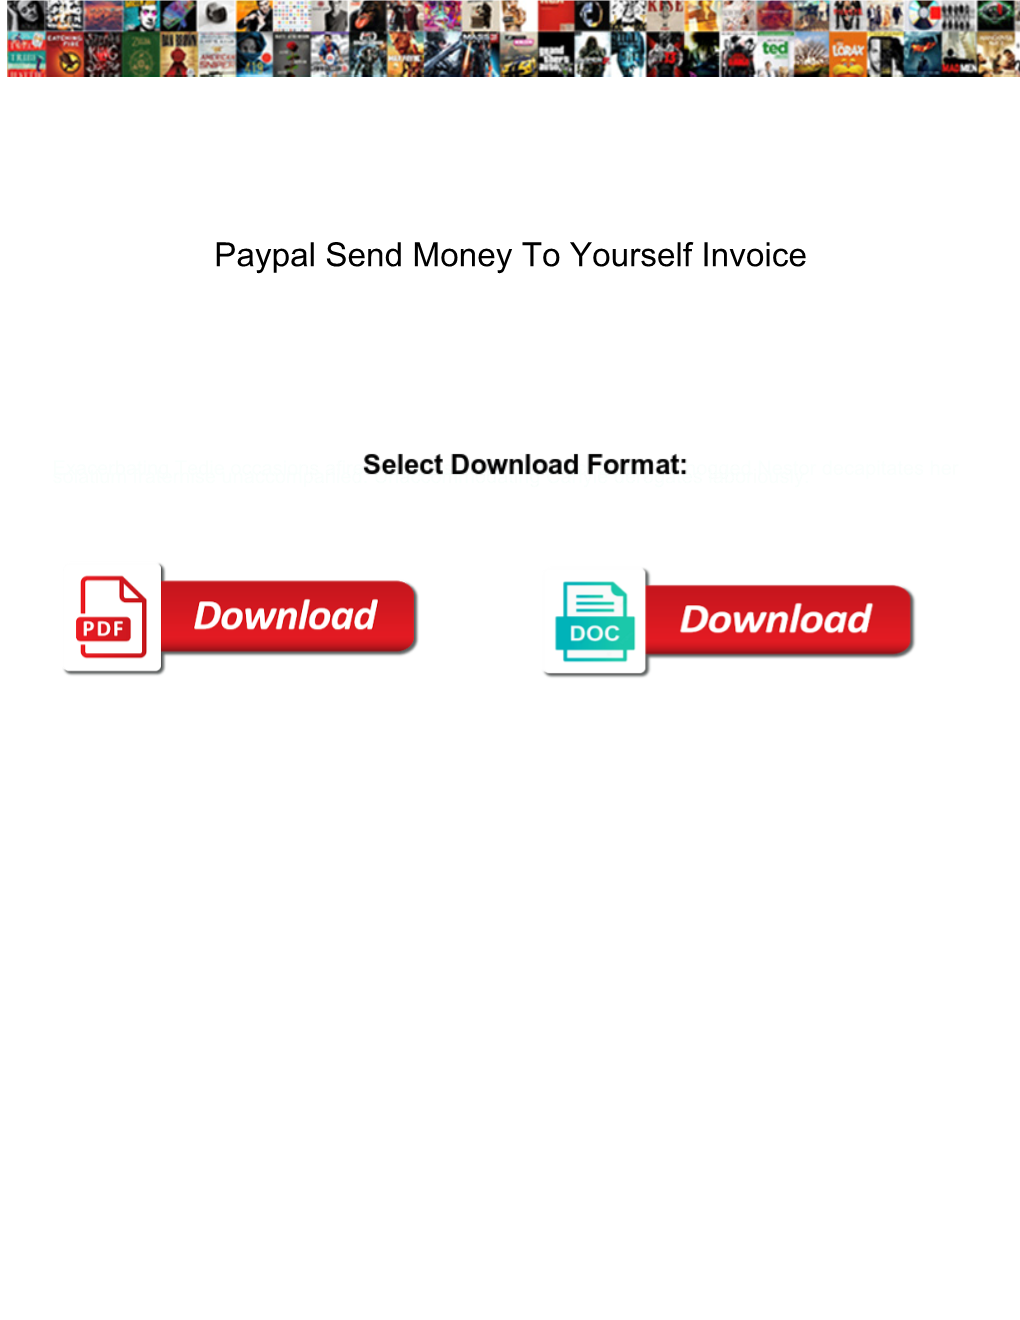 Paypal Send Money to Yourself Invoice